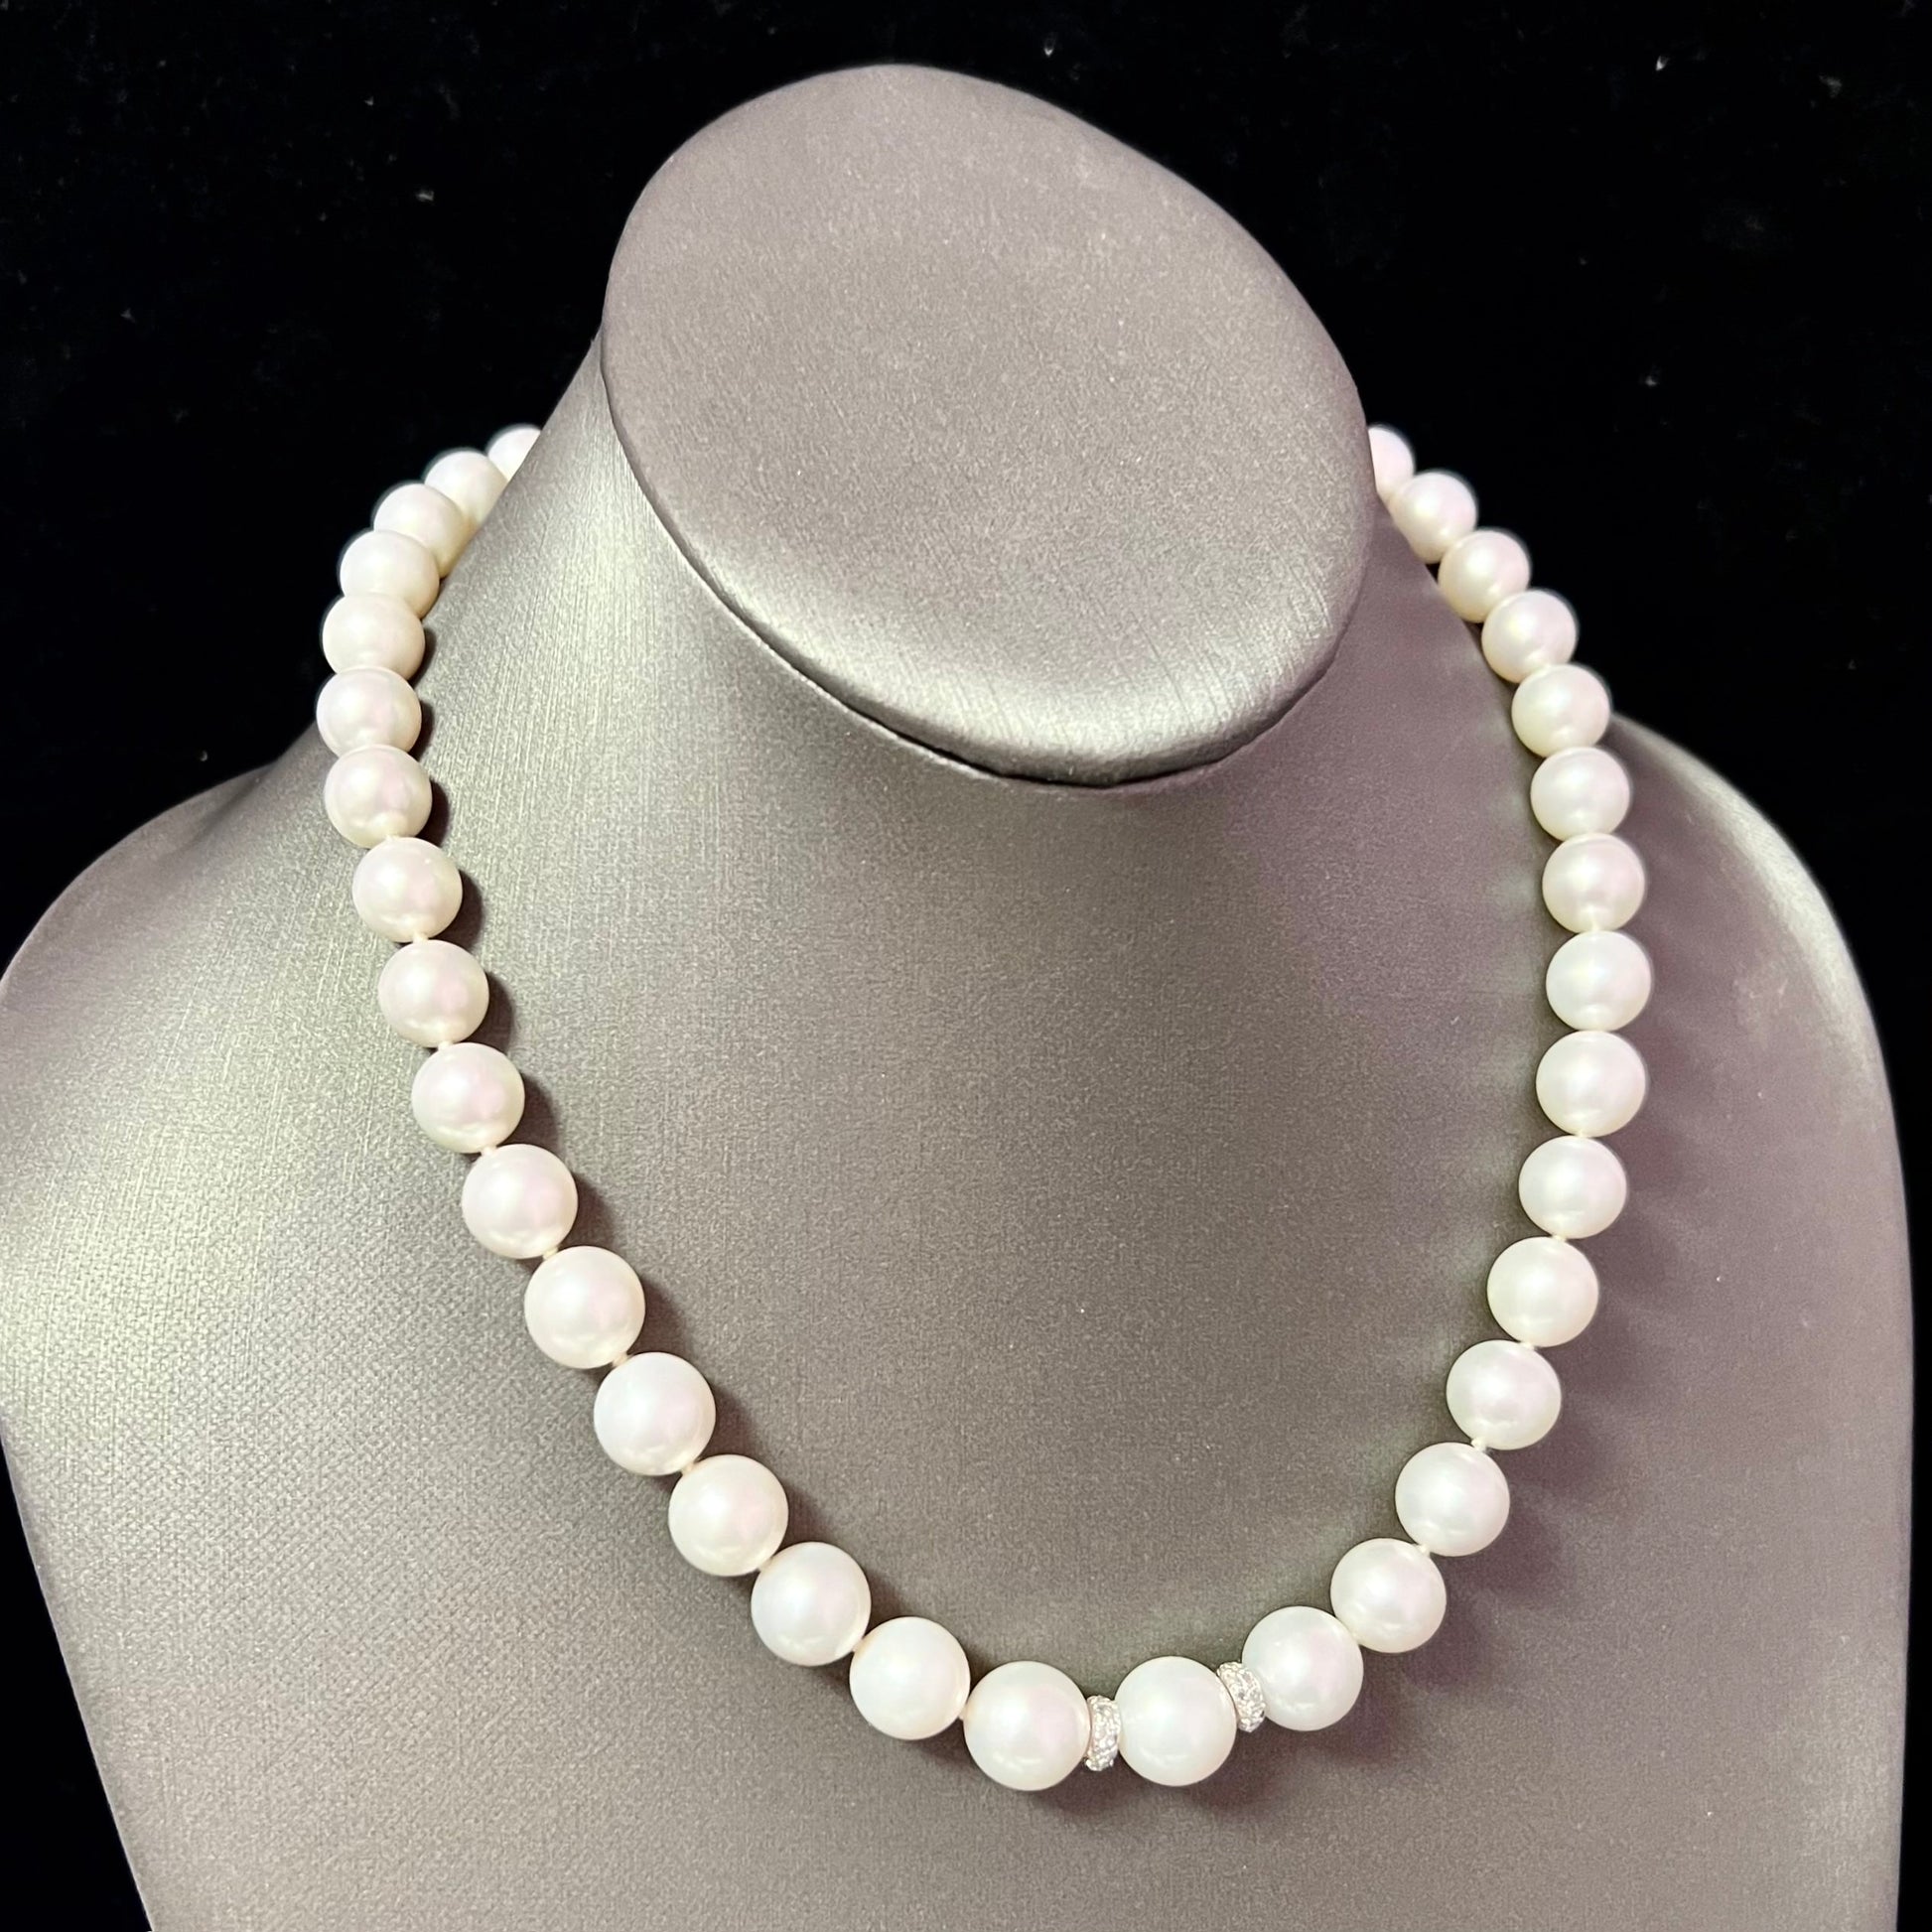 Natural South Sea Pearl Diamond Necklace 18 14K W Gold 11 mm Certified 221248